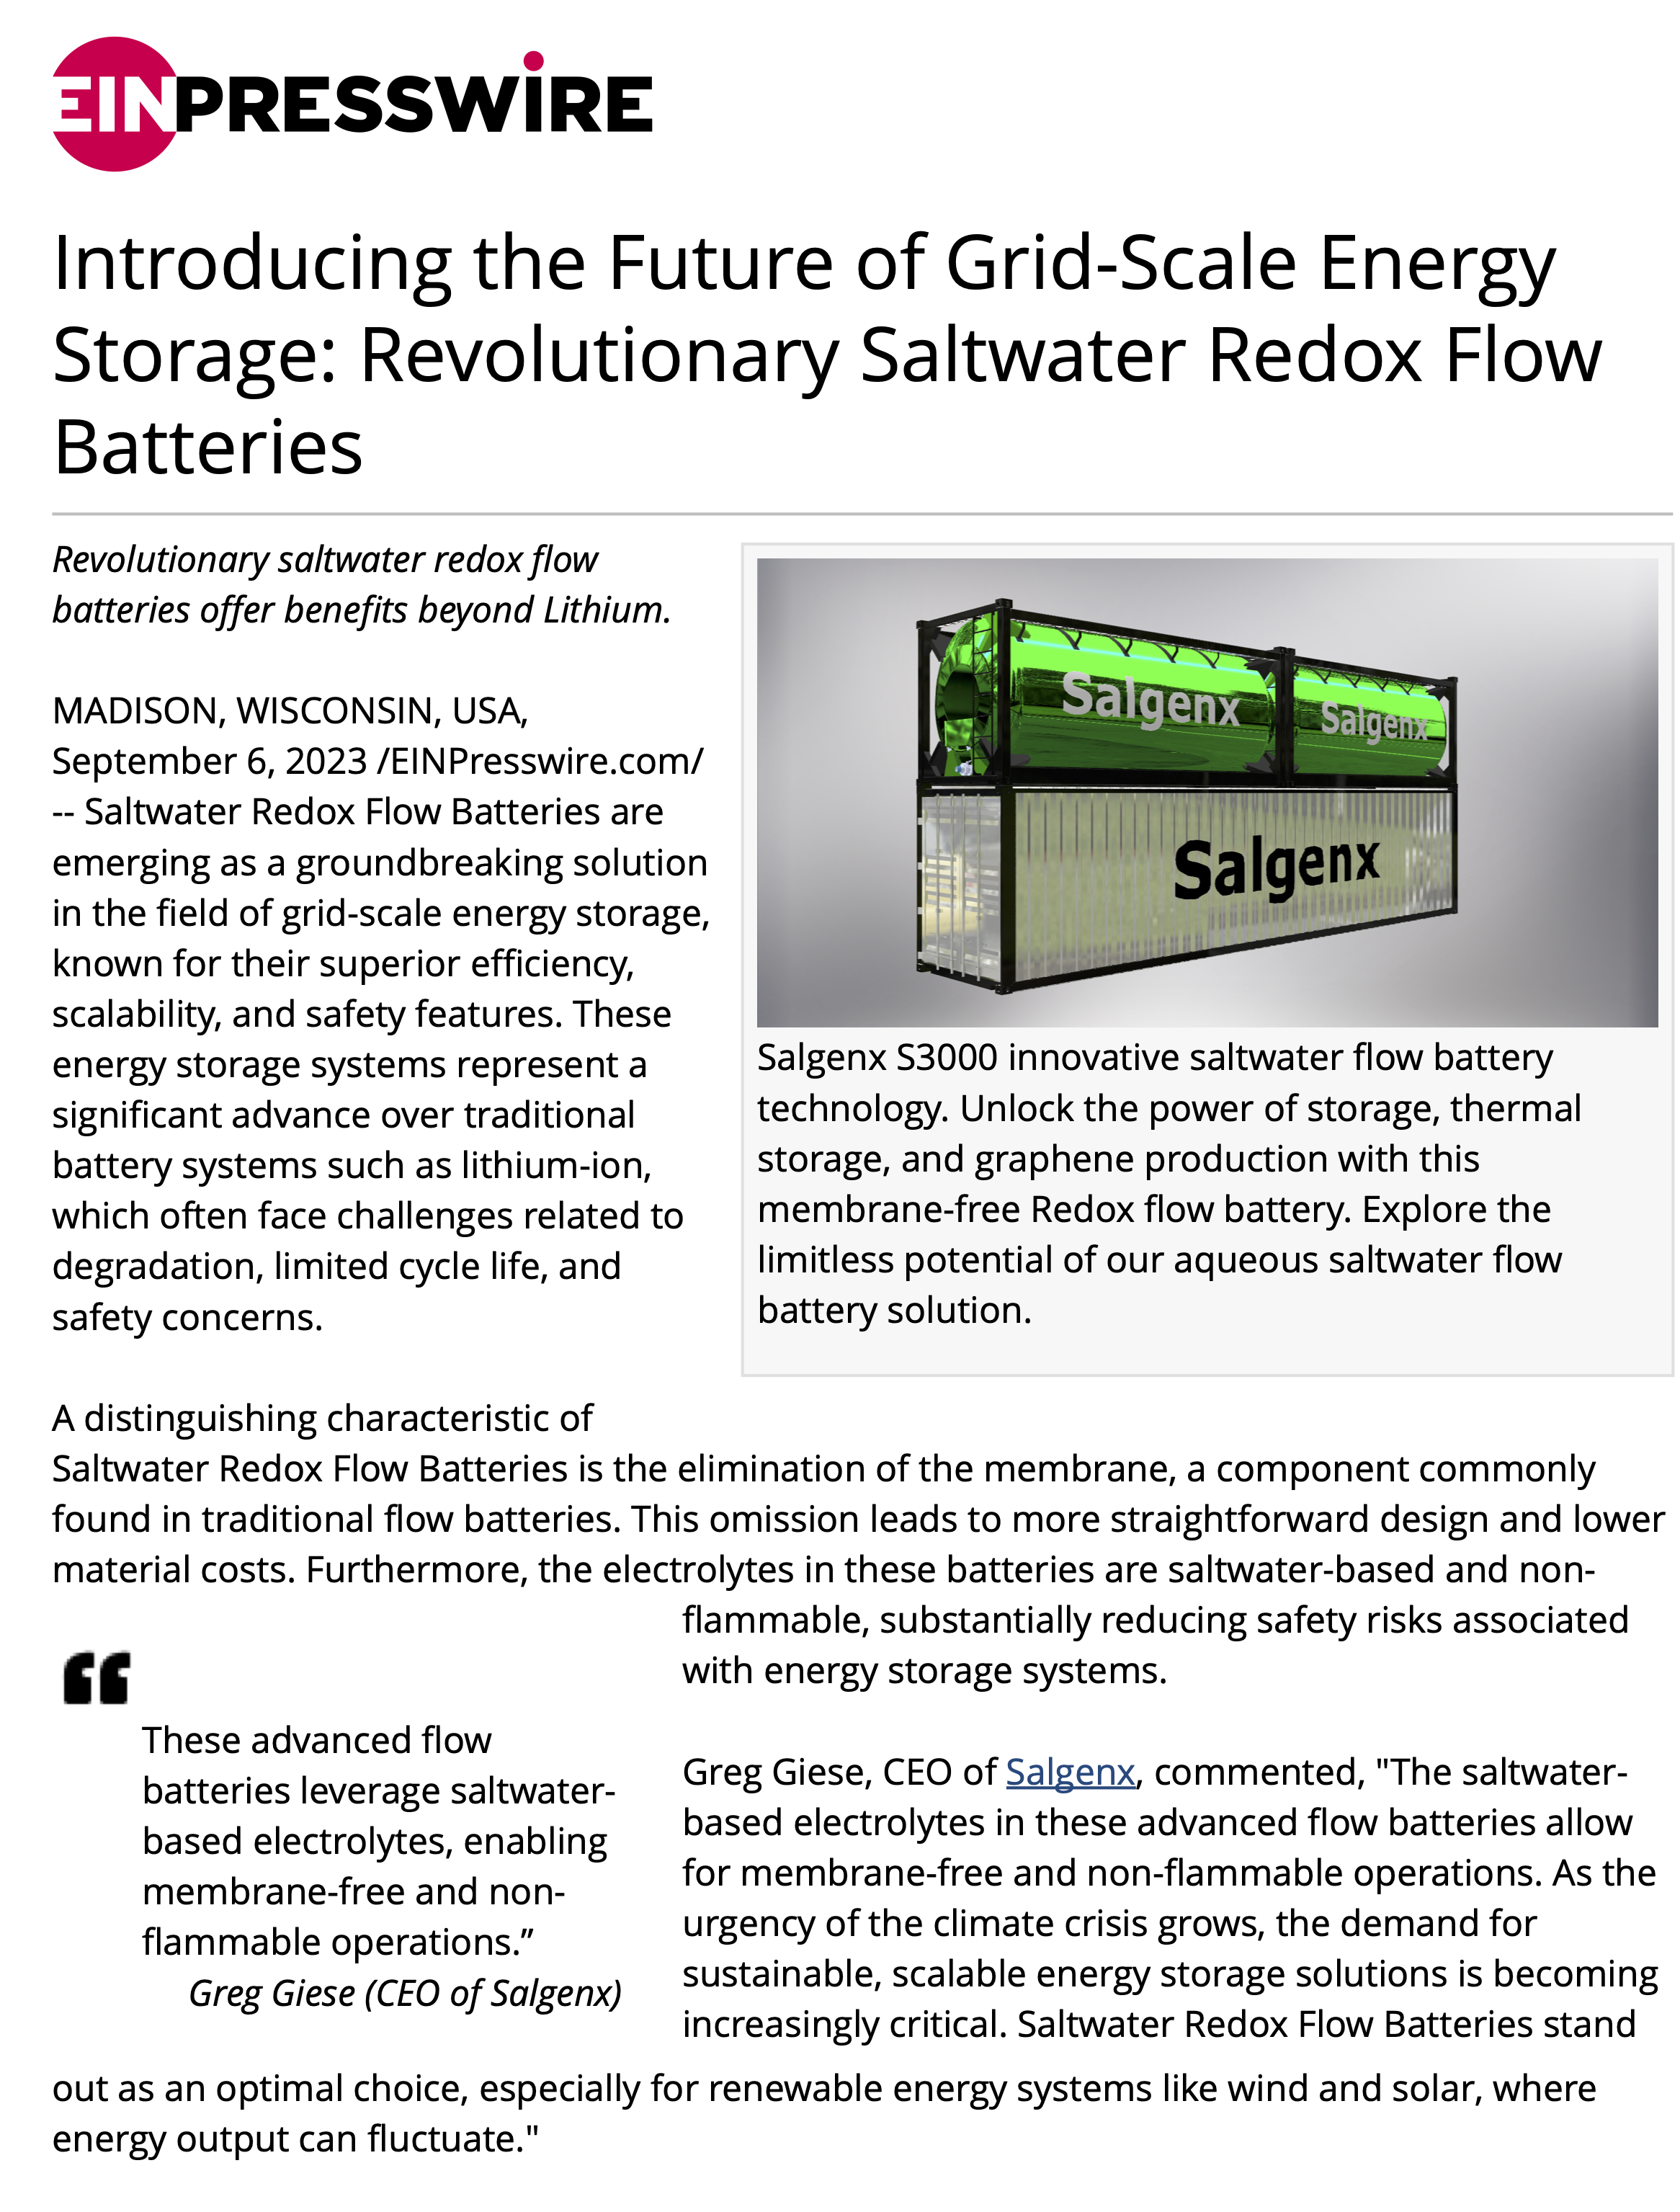 Introducing the Future of Grid-Scale Energy Storage: Revolutionary Saltwater Redox Flow Batteries